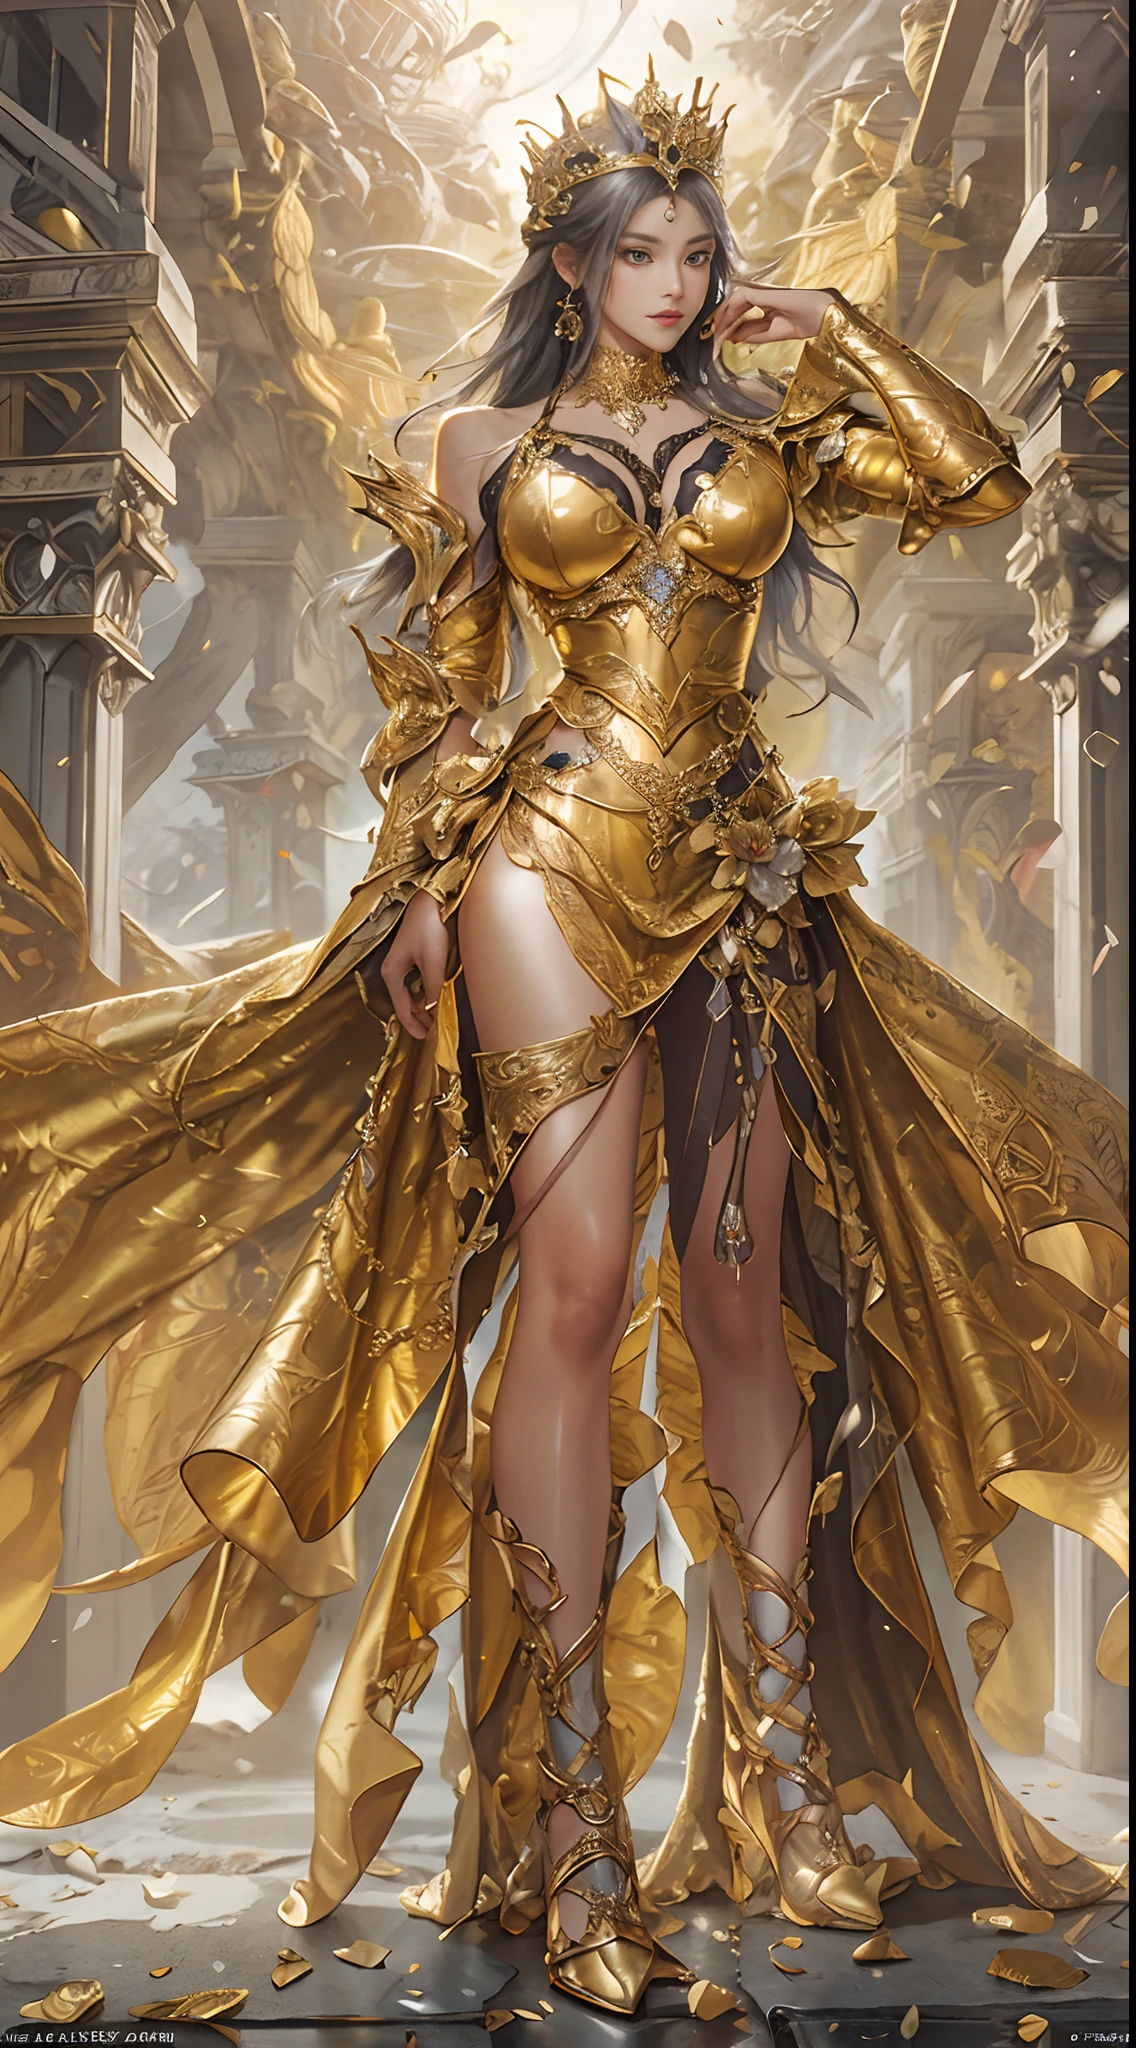 Woman in a golden dress, True Art Station, Rainstorm site, detailed fantasy art, Stunning character art, Beautiful and exquisite character art, Beautiful golden armor, Extremely detailed, Girl in shiny armor, Exquisite tiaras and jewelry, Full body capture, huge tit